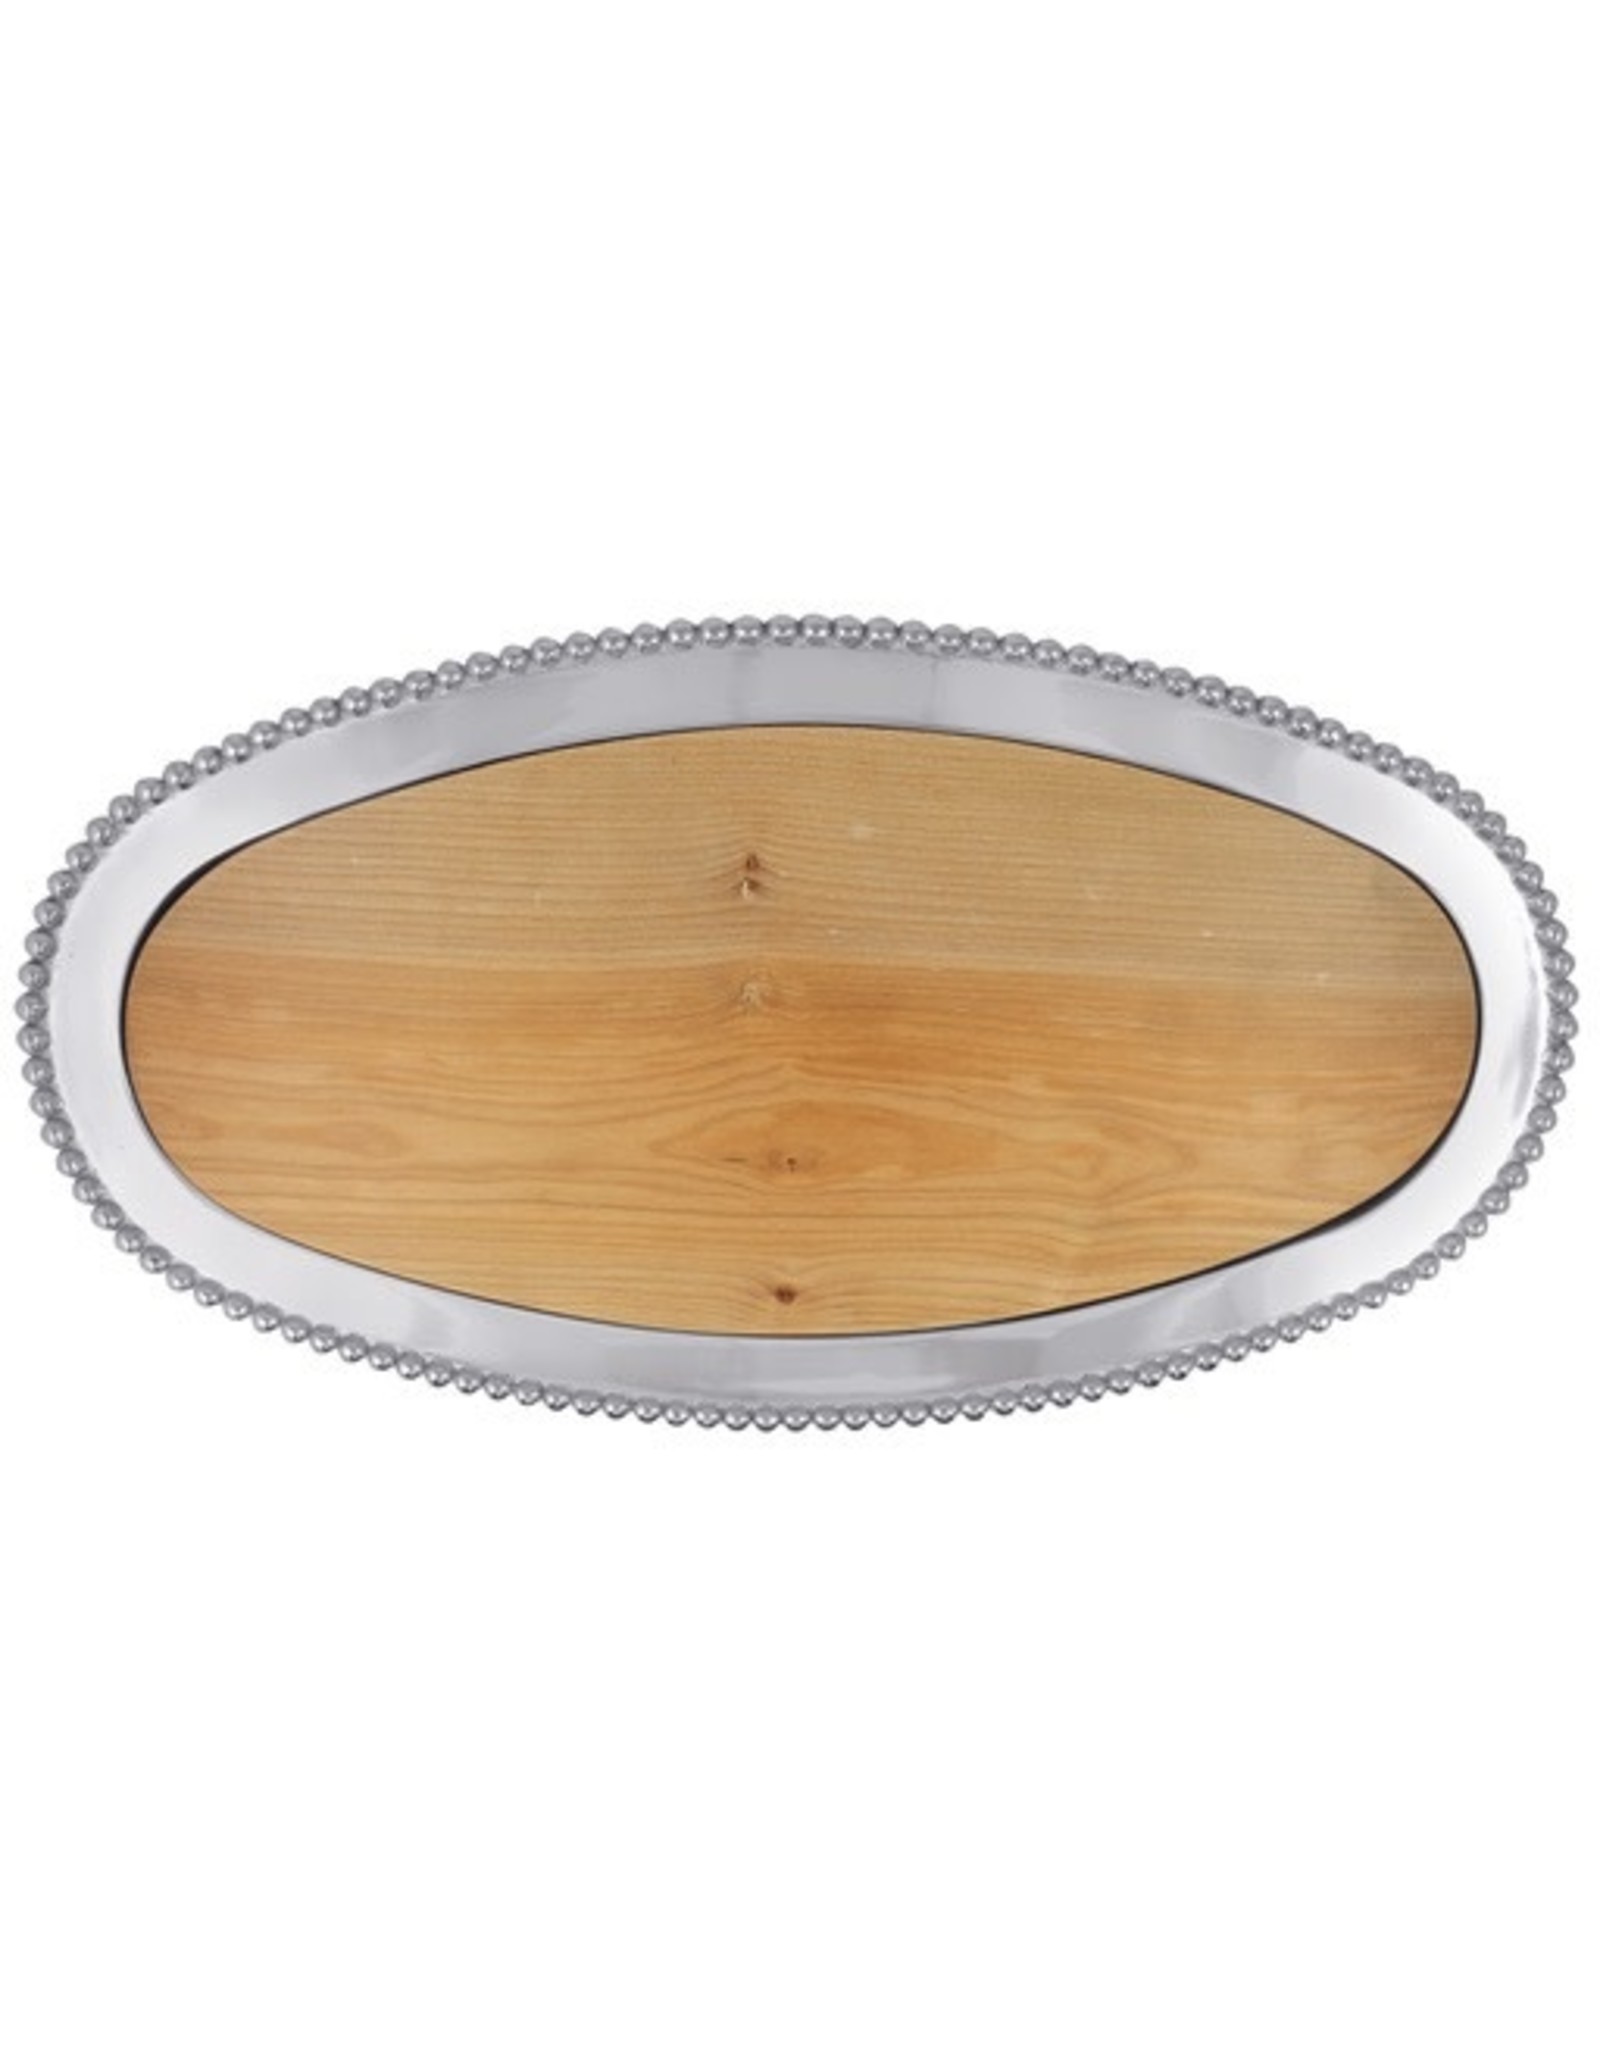 Mariposa String of Pearls Maple Oval Wood Server 23.5x12.5